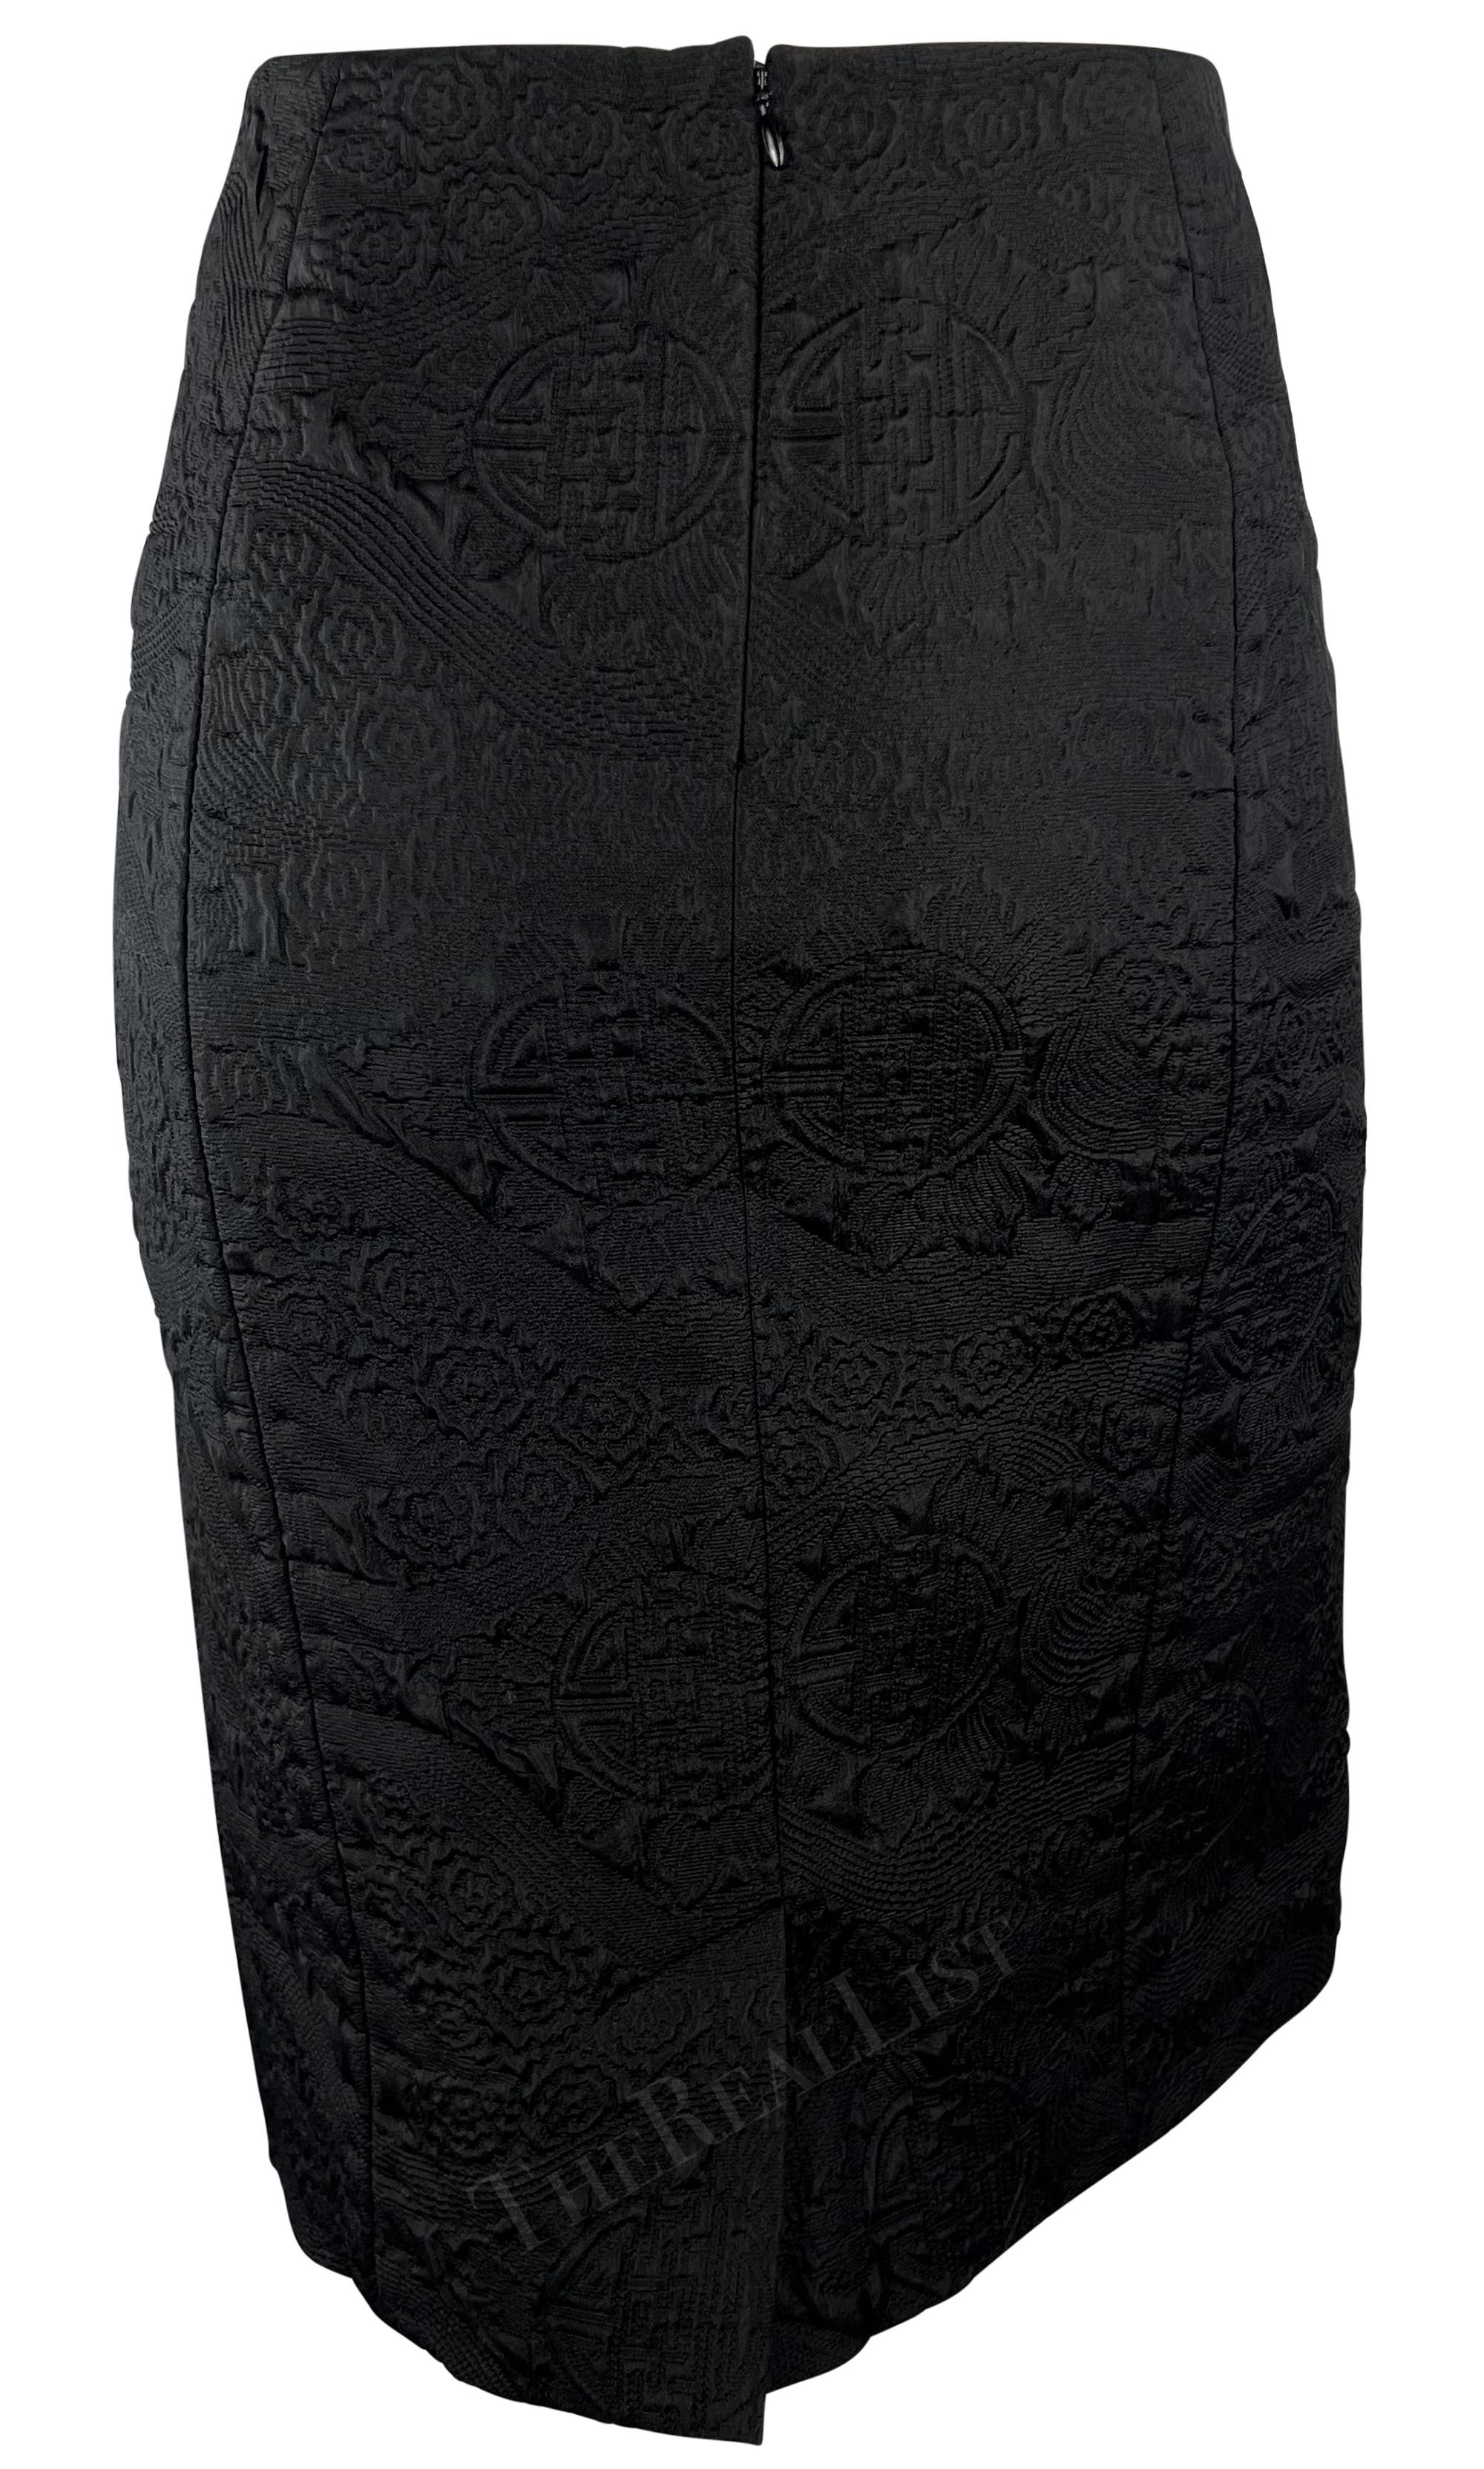 F/W 2004 Yves Saint Laurent by Tom Ford Chinoiserie Brocade Black Skirt For Sale 1